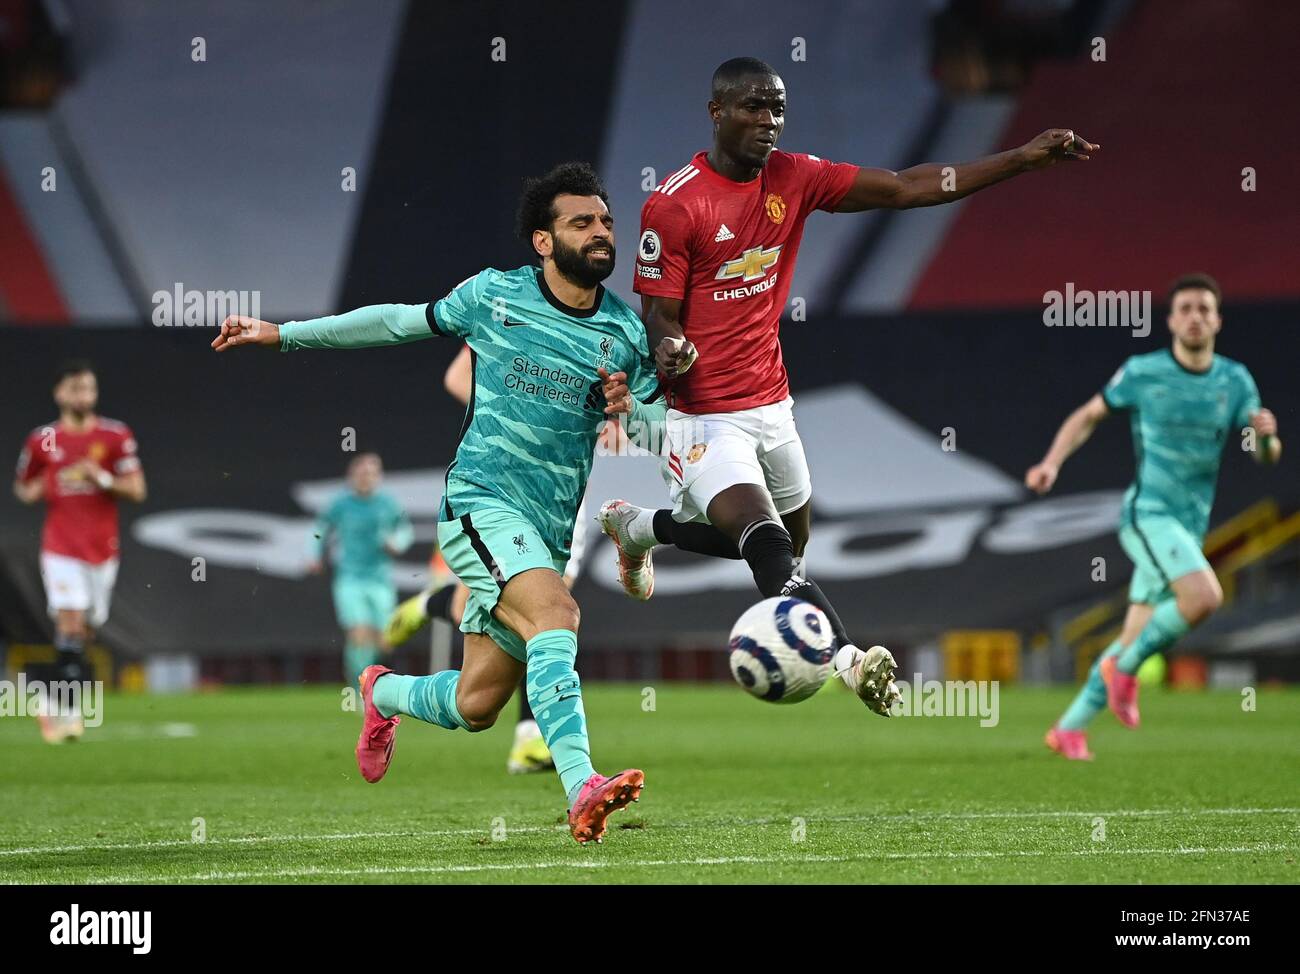 Liverpool's Mohamed Salah (left) and Manchester United's Eric Bailly battle for the ball during the Premier League match at Old Trafford, Manchester. Picture date: Thursday May 13, 2021. Stock Photo